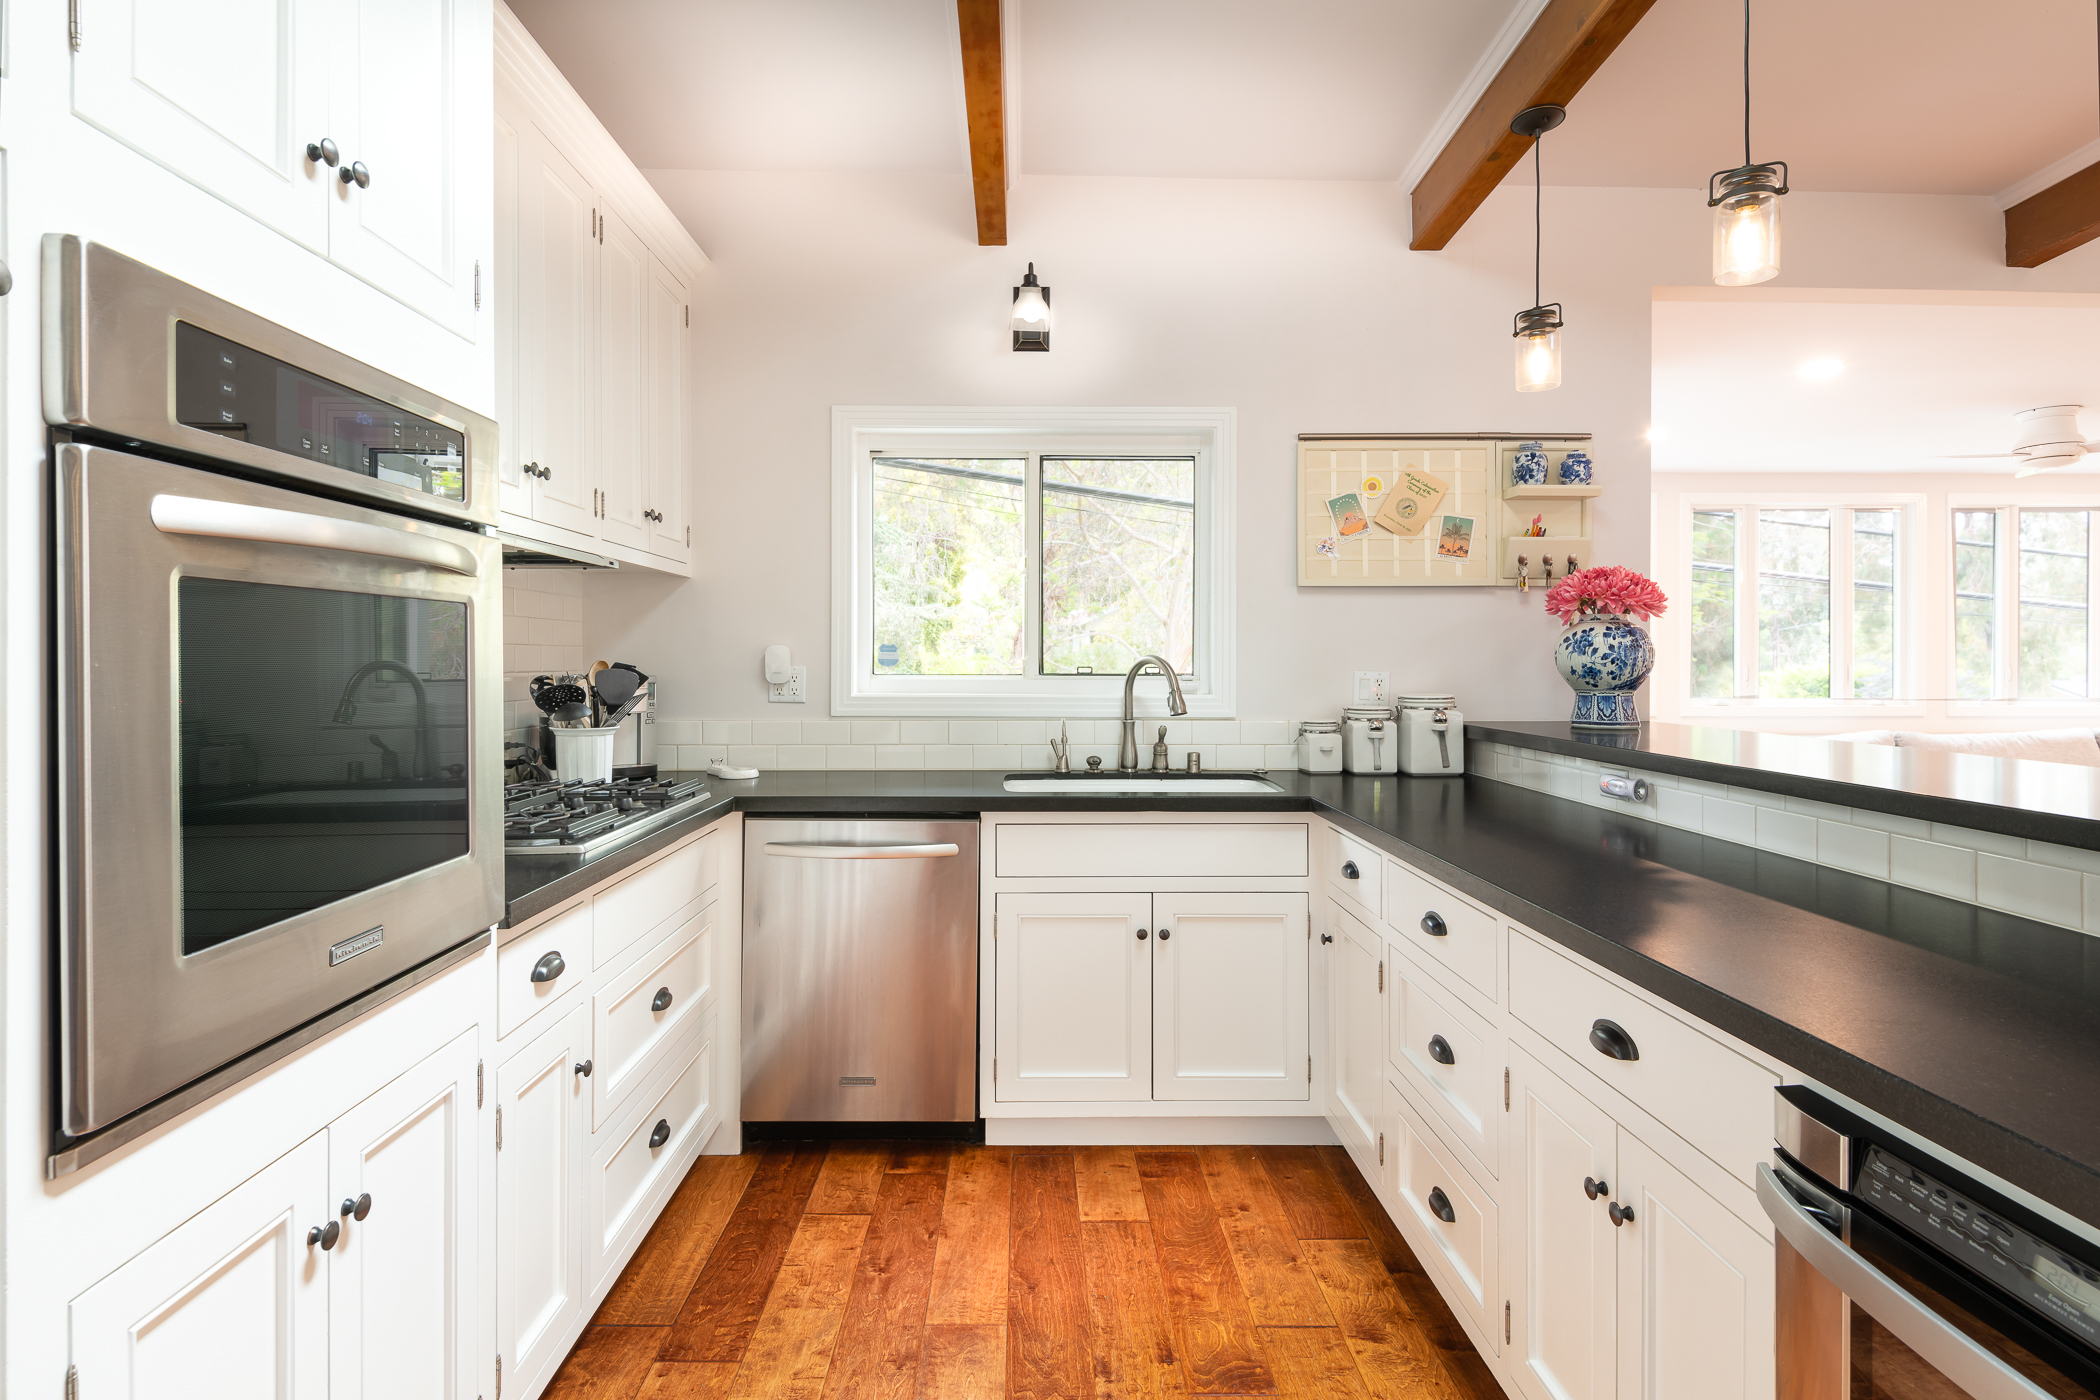 Bright kitchen with wood exposed beams and hand hewn floor and view of black countertops and white cabinets